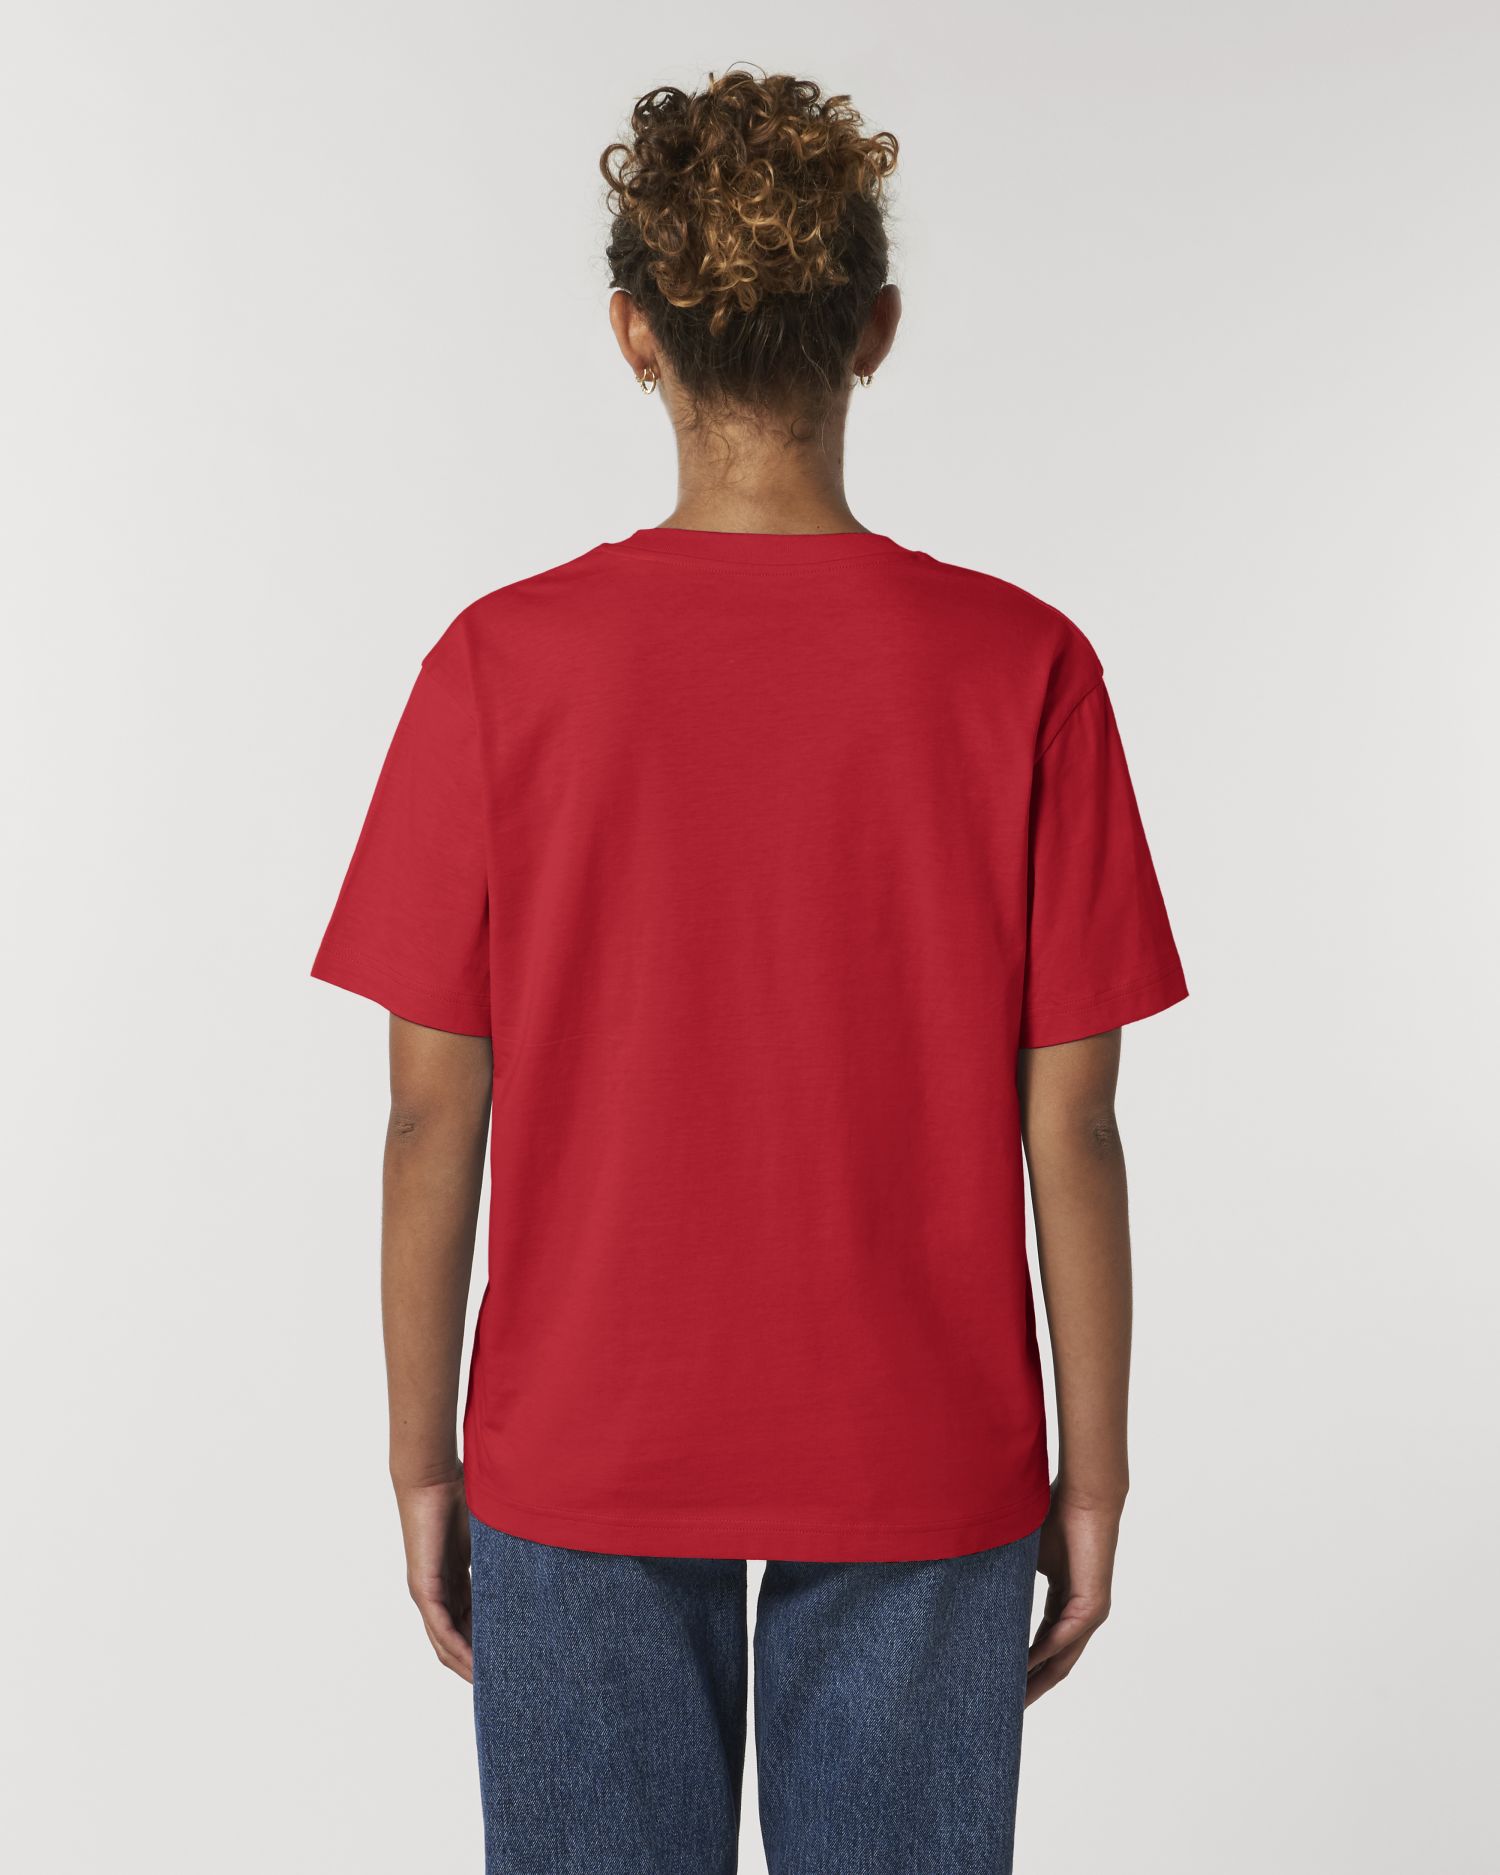 T-Shirt Fuser in Farbe Red